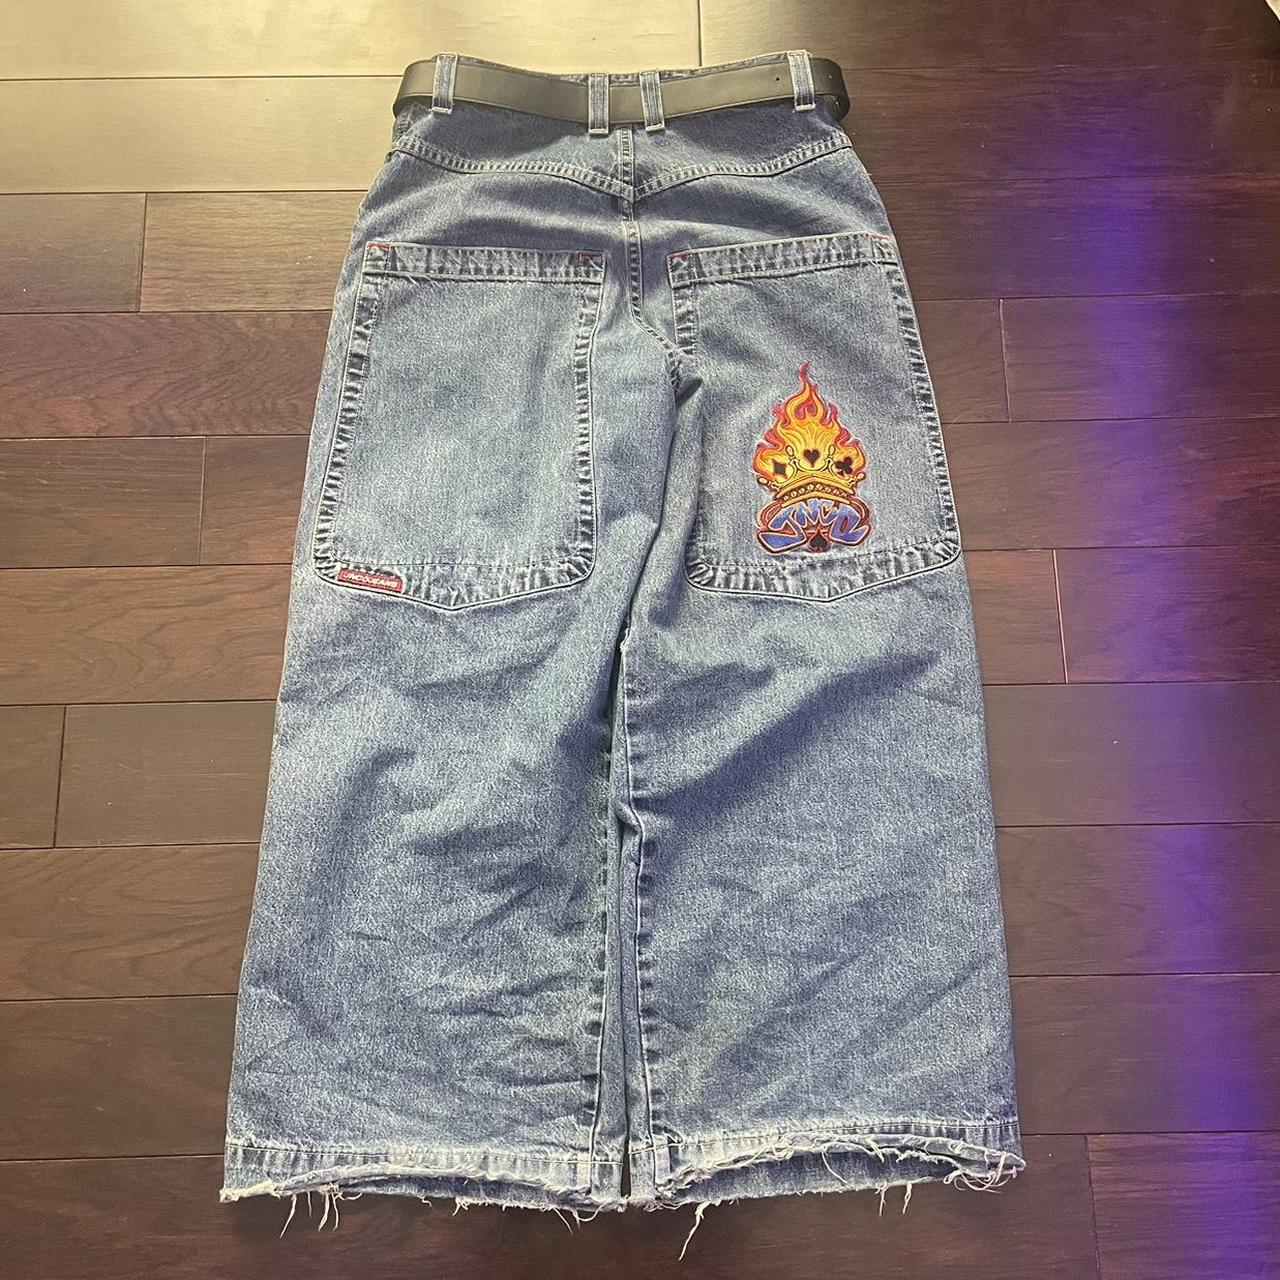 JNCO GRAIL FLAMING SPADES‼️‼️ these are probably nfs... - Depop